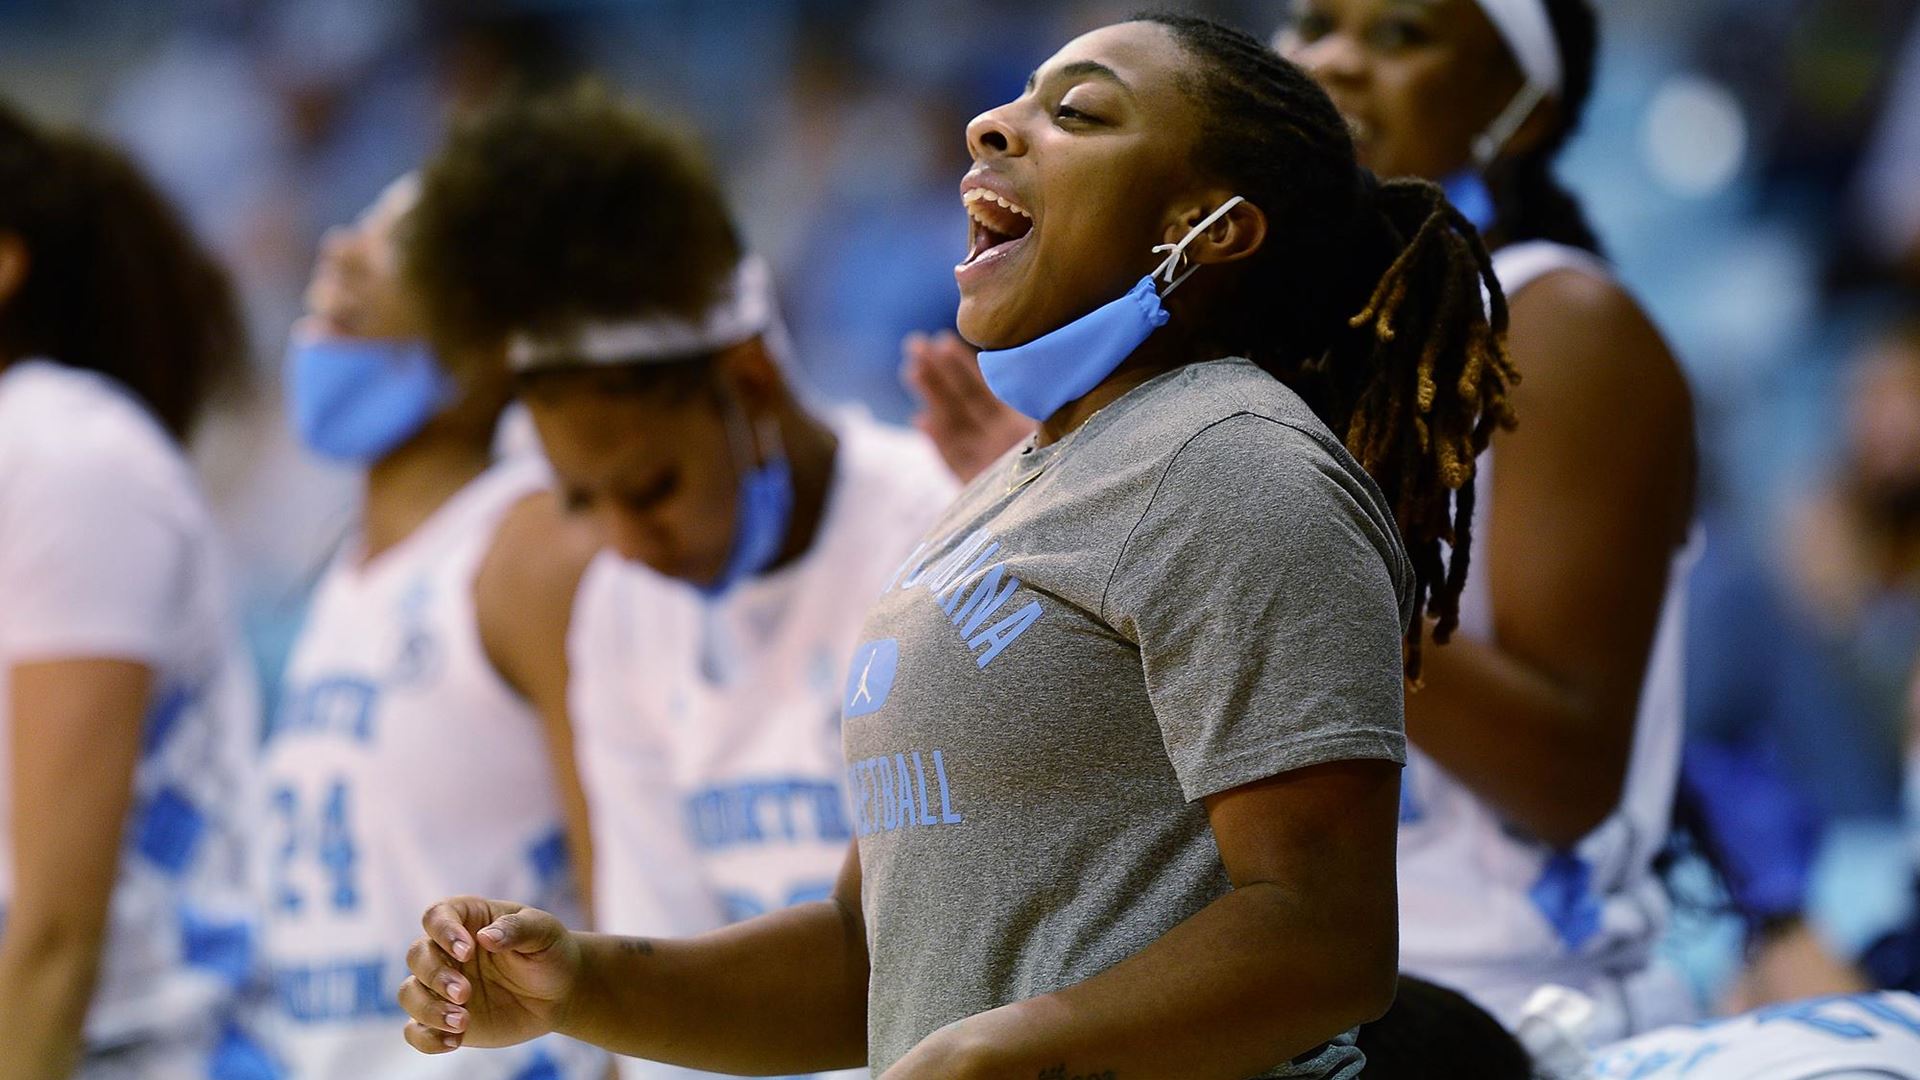 ‘Expect Some Dawgs’: Injured UNC Women’s Basketball Players Look to 2023